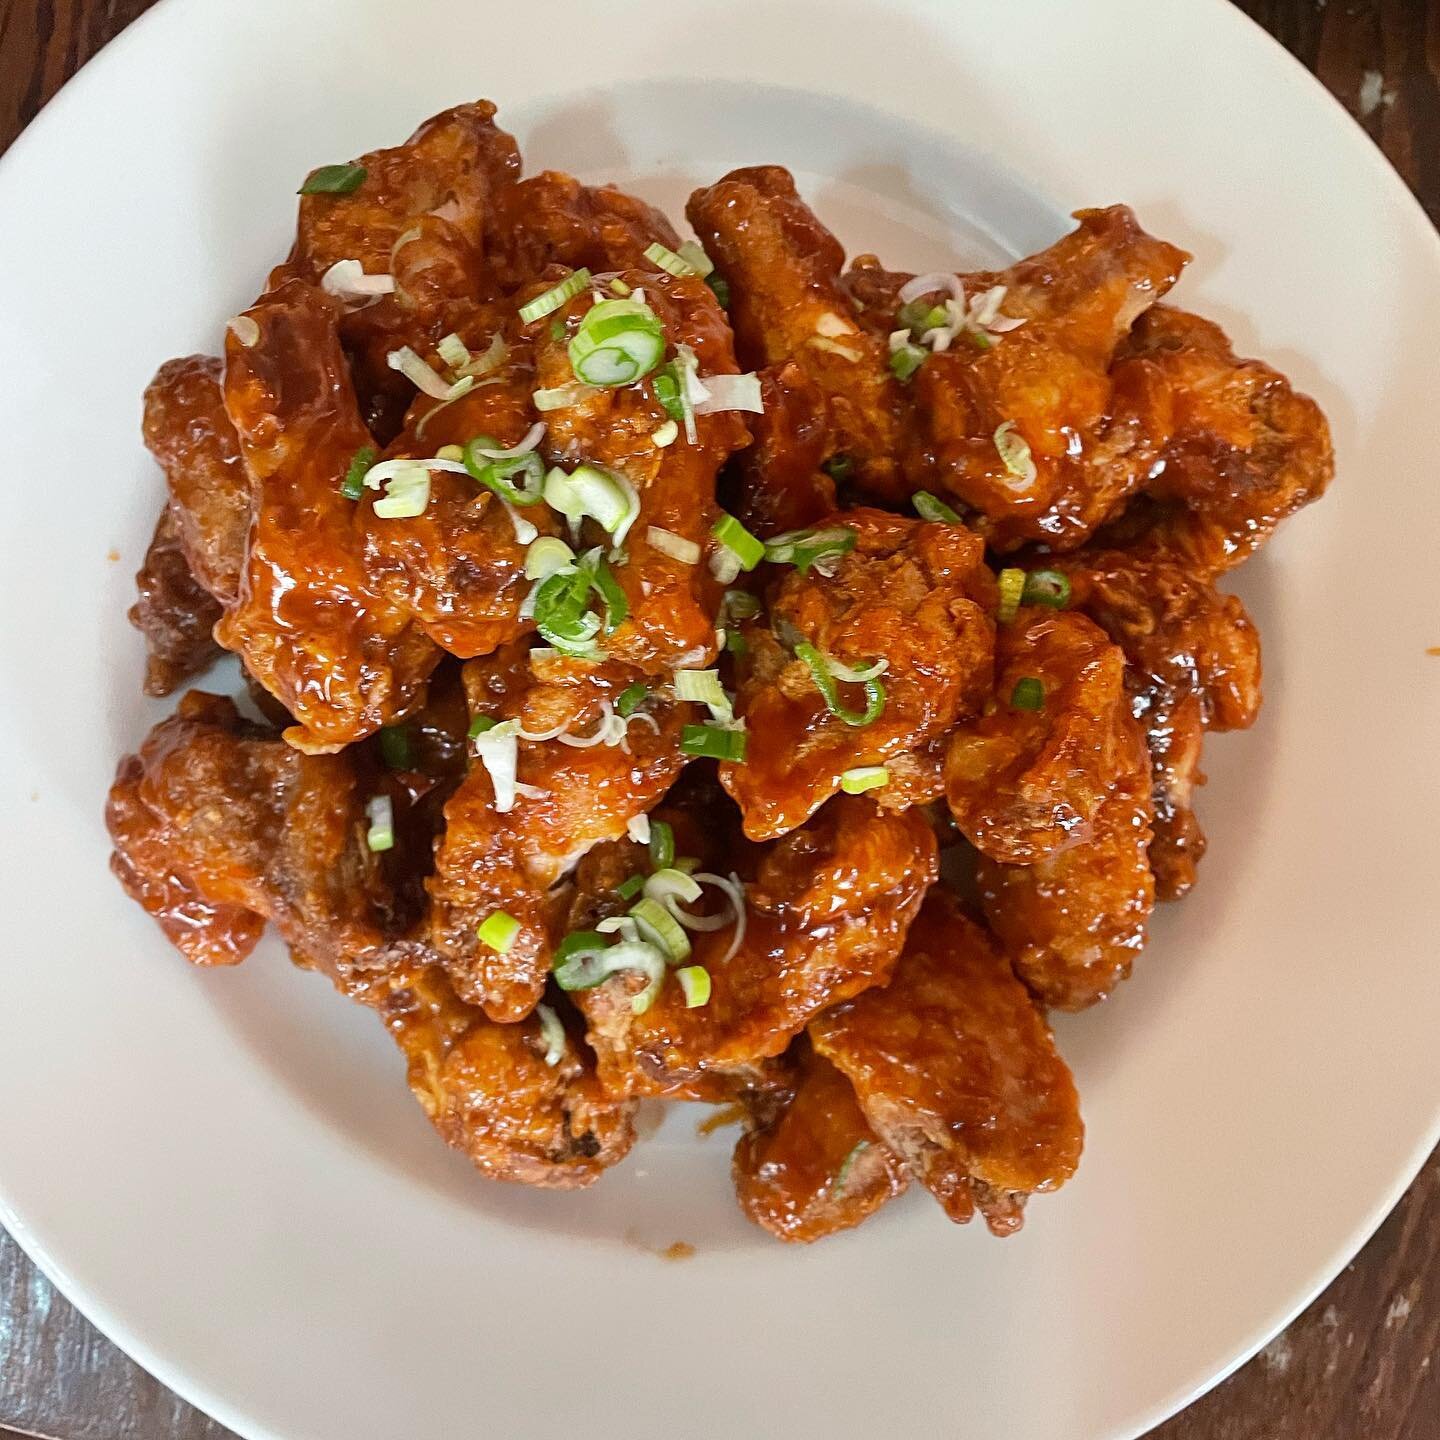 It&rsquo;s Wednesday and you all know what that means by now: Wings !

⭐️ Each 50p .
⭐️⭐️ 500g &pound;5.50 .
⭐️⭐️⭐️ 1KG &pound;10.00 .
.
.
.

.
#bristol #bs8 #clifton #cliftonvillage #cliftonvillagebristol #bristollife #bristol247 #visitbristol #what